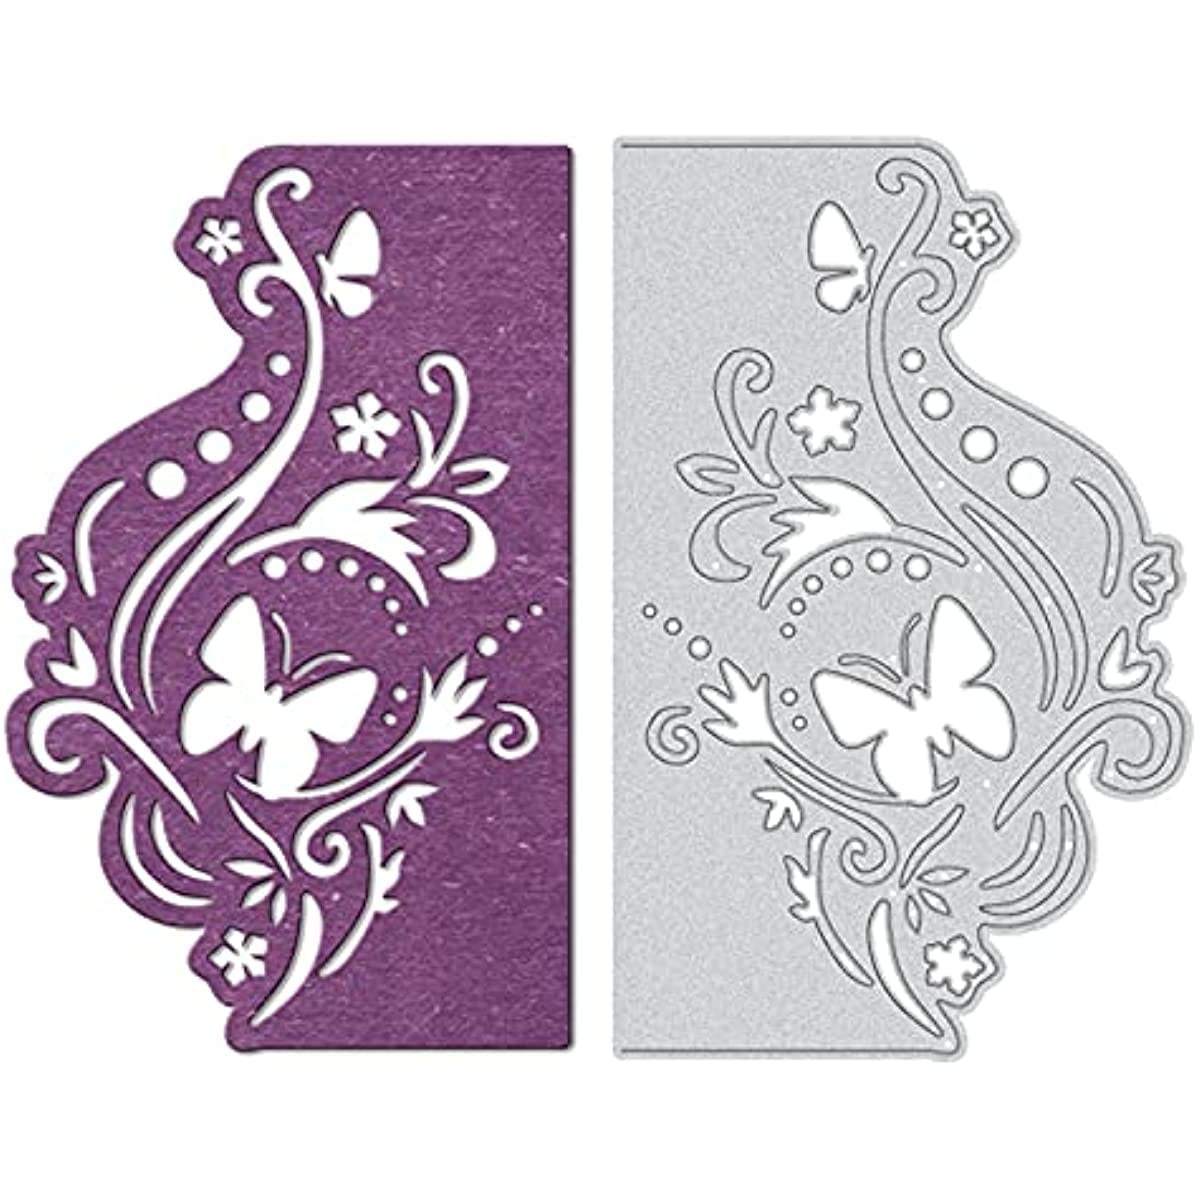 Glit-Aug5 Flourish Border Dies for Card Making - China Scrapbooking Dies  and Cutting Dies for Scrapbooking price